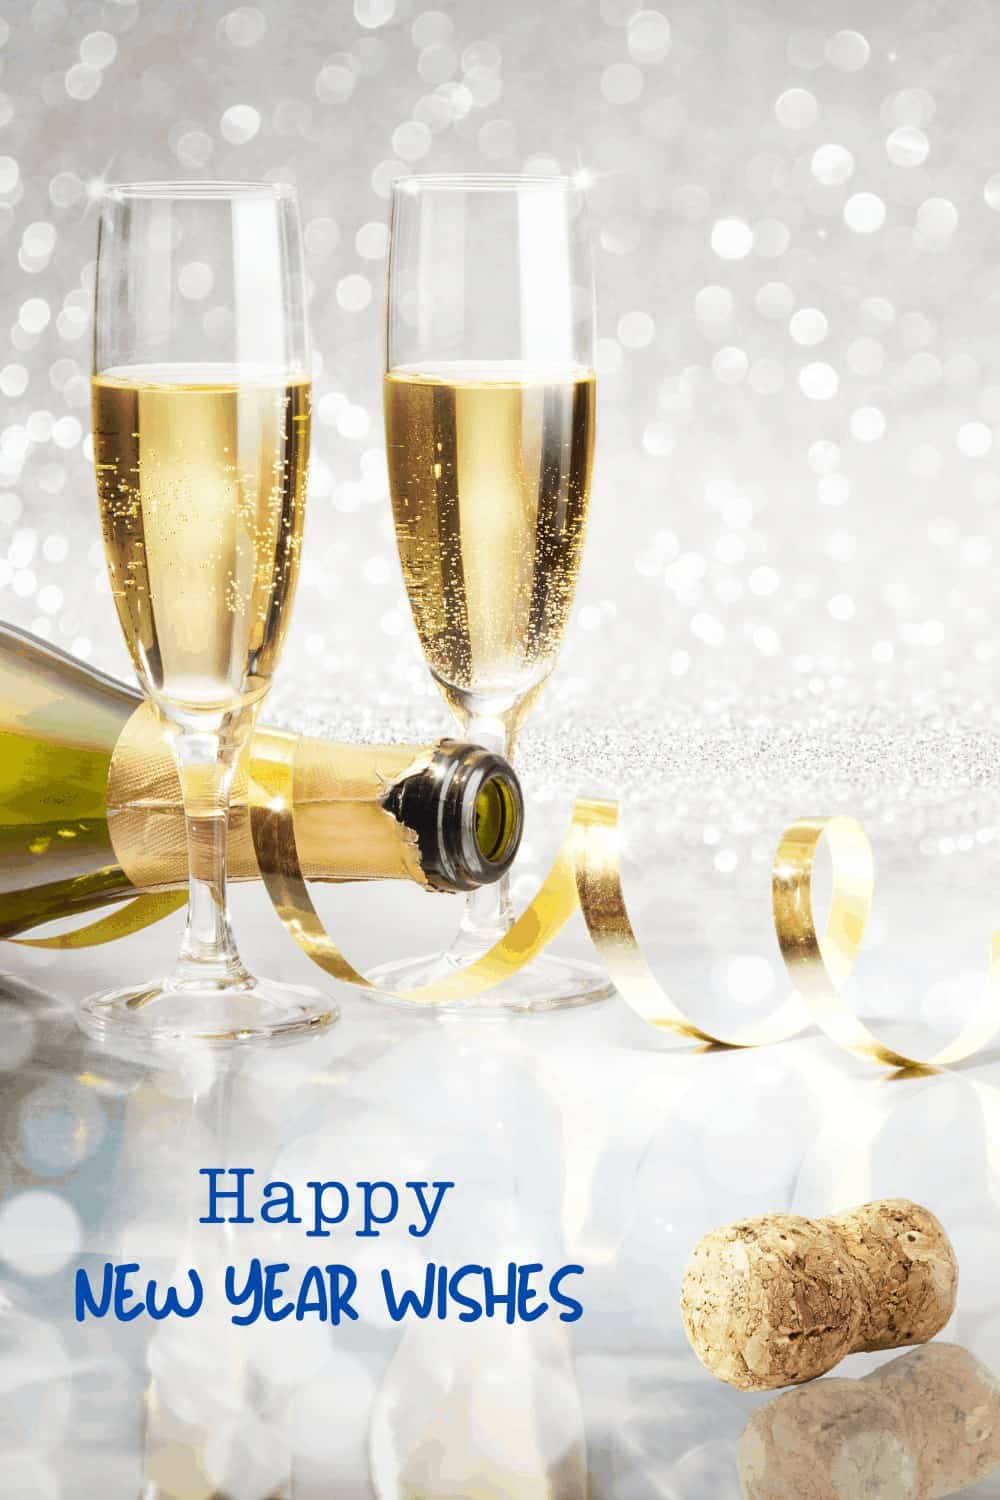 Happy New Year Wishes champagne glasses 